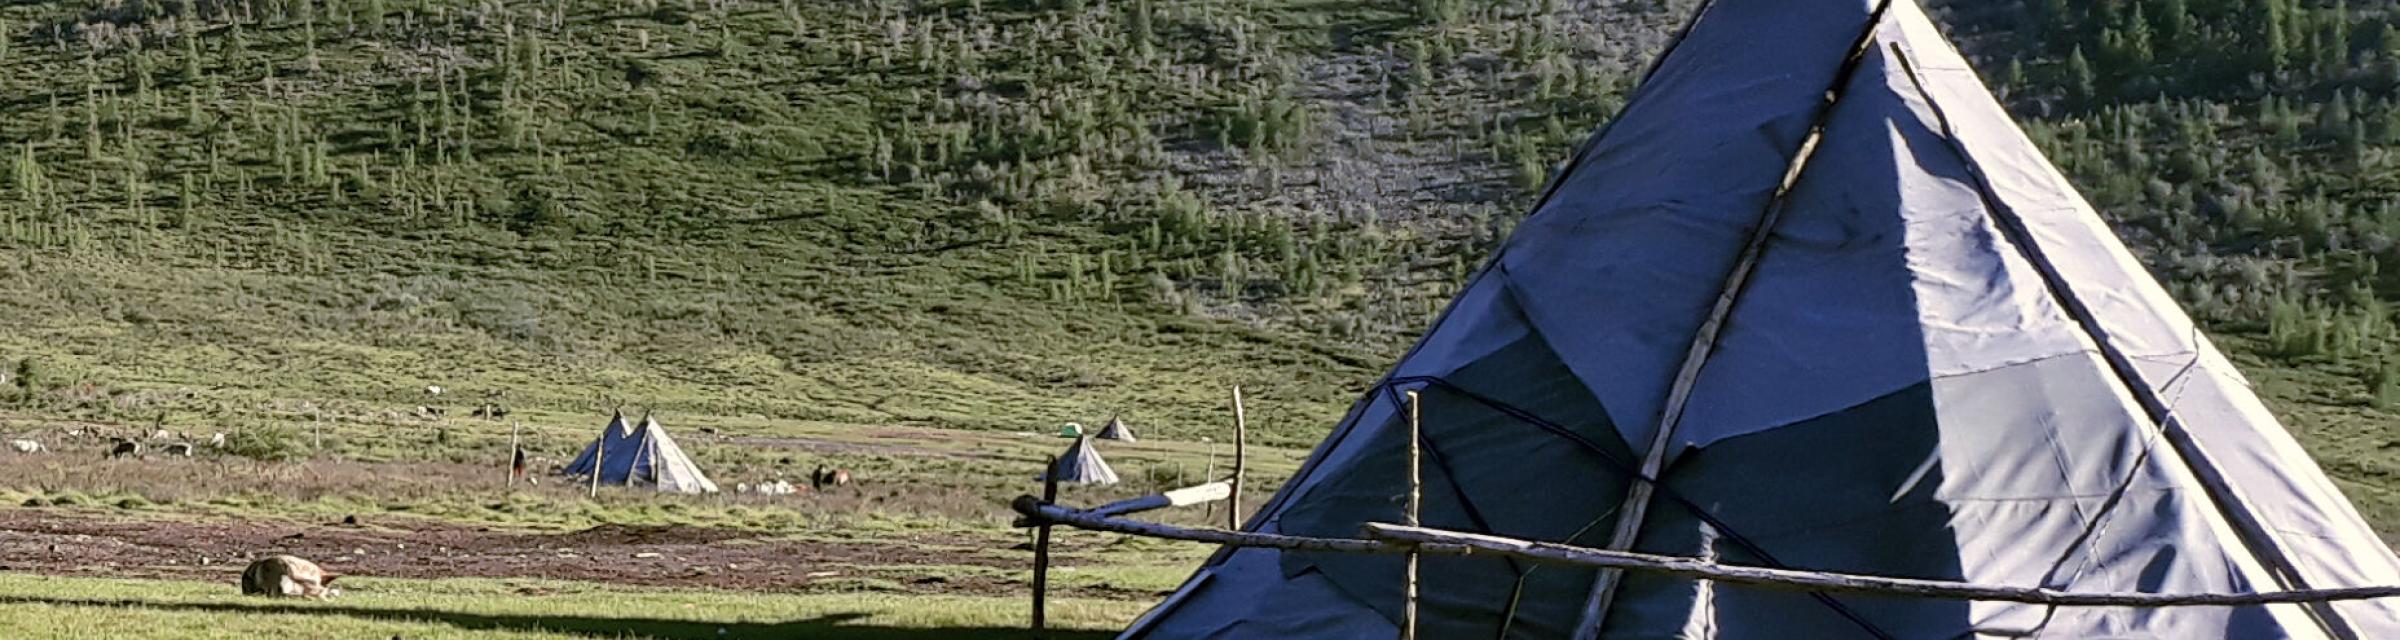 View of the nomadic Tsaatan reindeer herders' settlement of tents in a remote valley in Mongolia. Photo by Buyana.